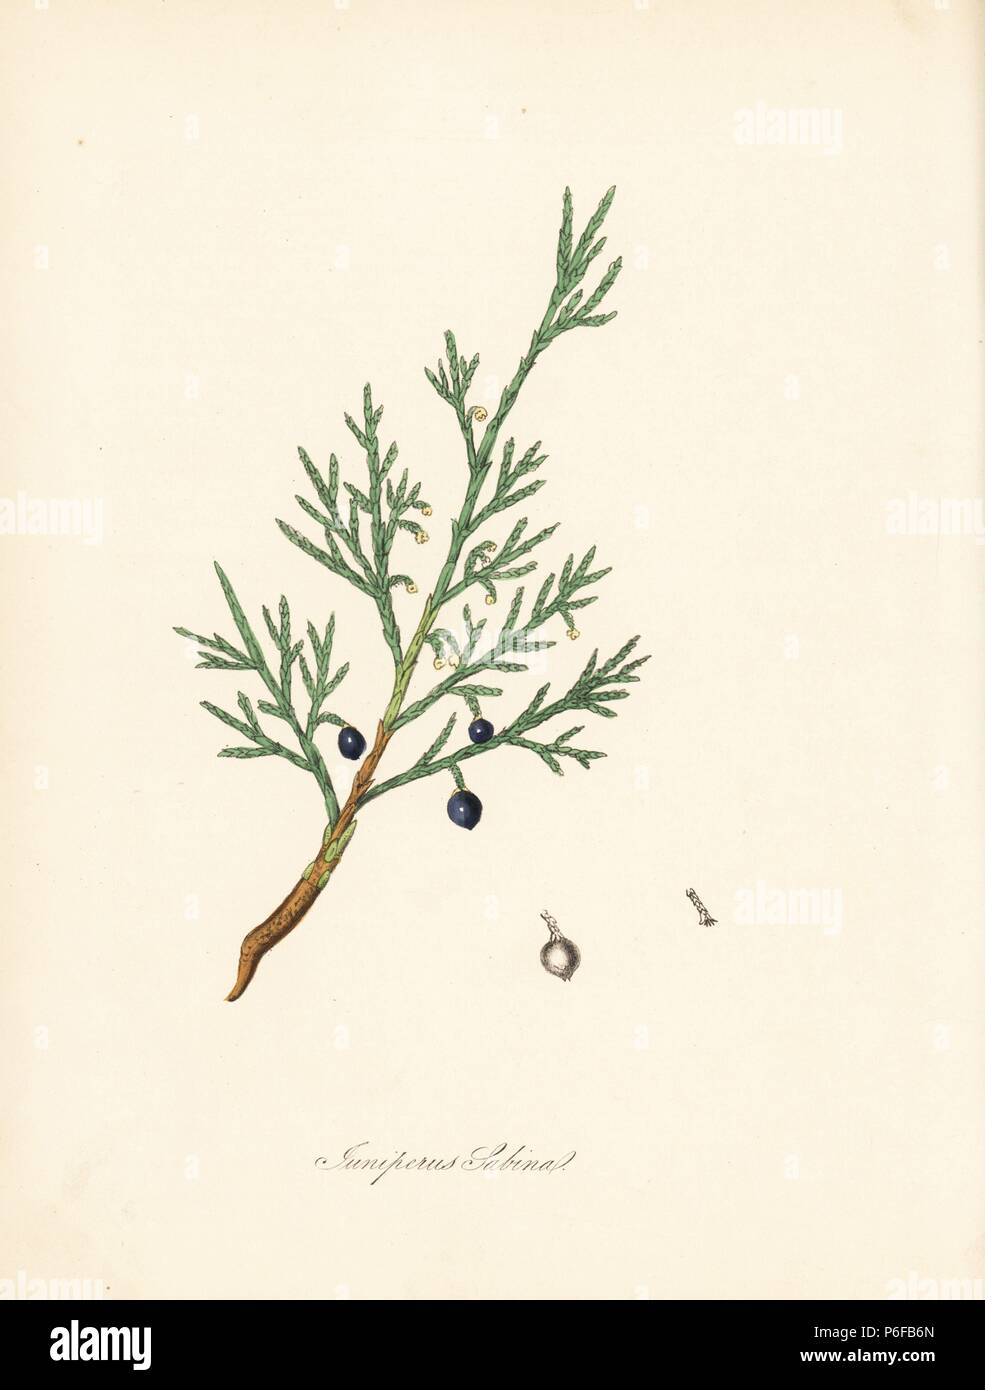 Common savin or juniper savin, Juniperus sabina. Taken from an illustration by James Sowerby from William Woodville and Sir William Jackson Hooker's 'Medical Botany.' Handcoloured zincograph by C. Chabot drawn by Miss M. A. Burnett from her 'Plantae Utiliores: or Illustrations of Useful Plants,' Whittaker, London, 1842. Miss Burnett drew the botanical illustrations, but the text was chiefly by her late brother, British botanist Gilbert Thomas Burnett (1800-1835). Stock Photo